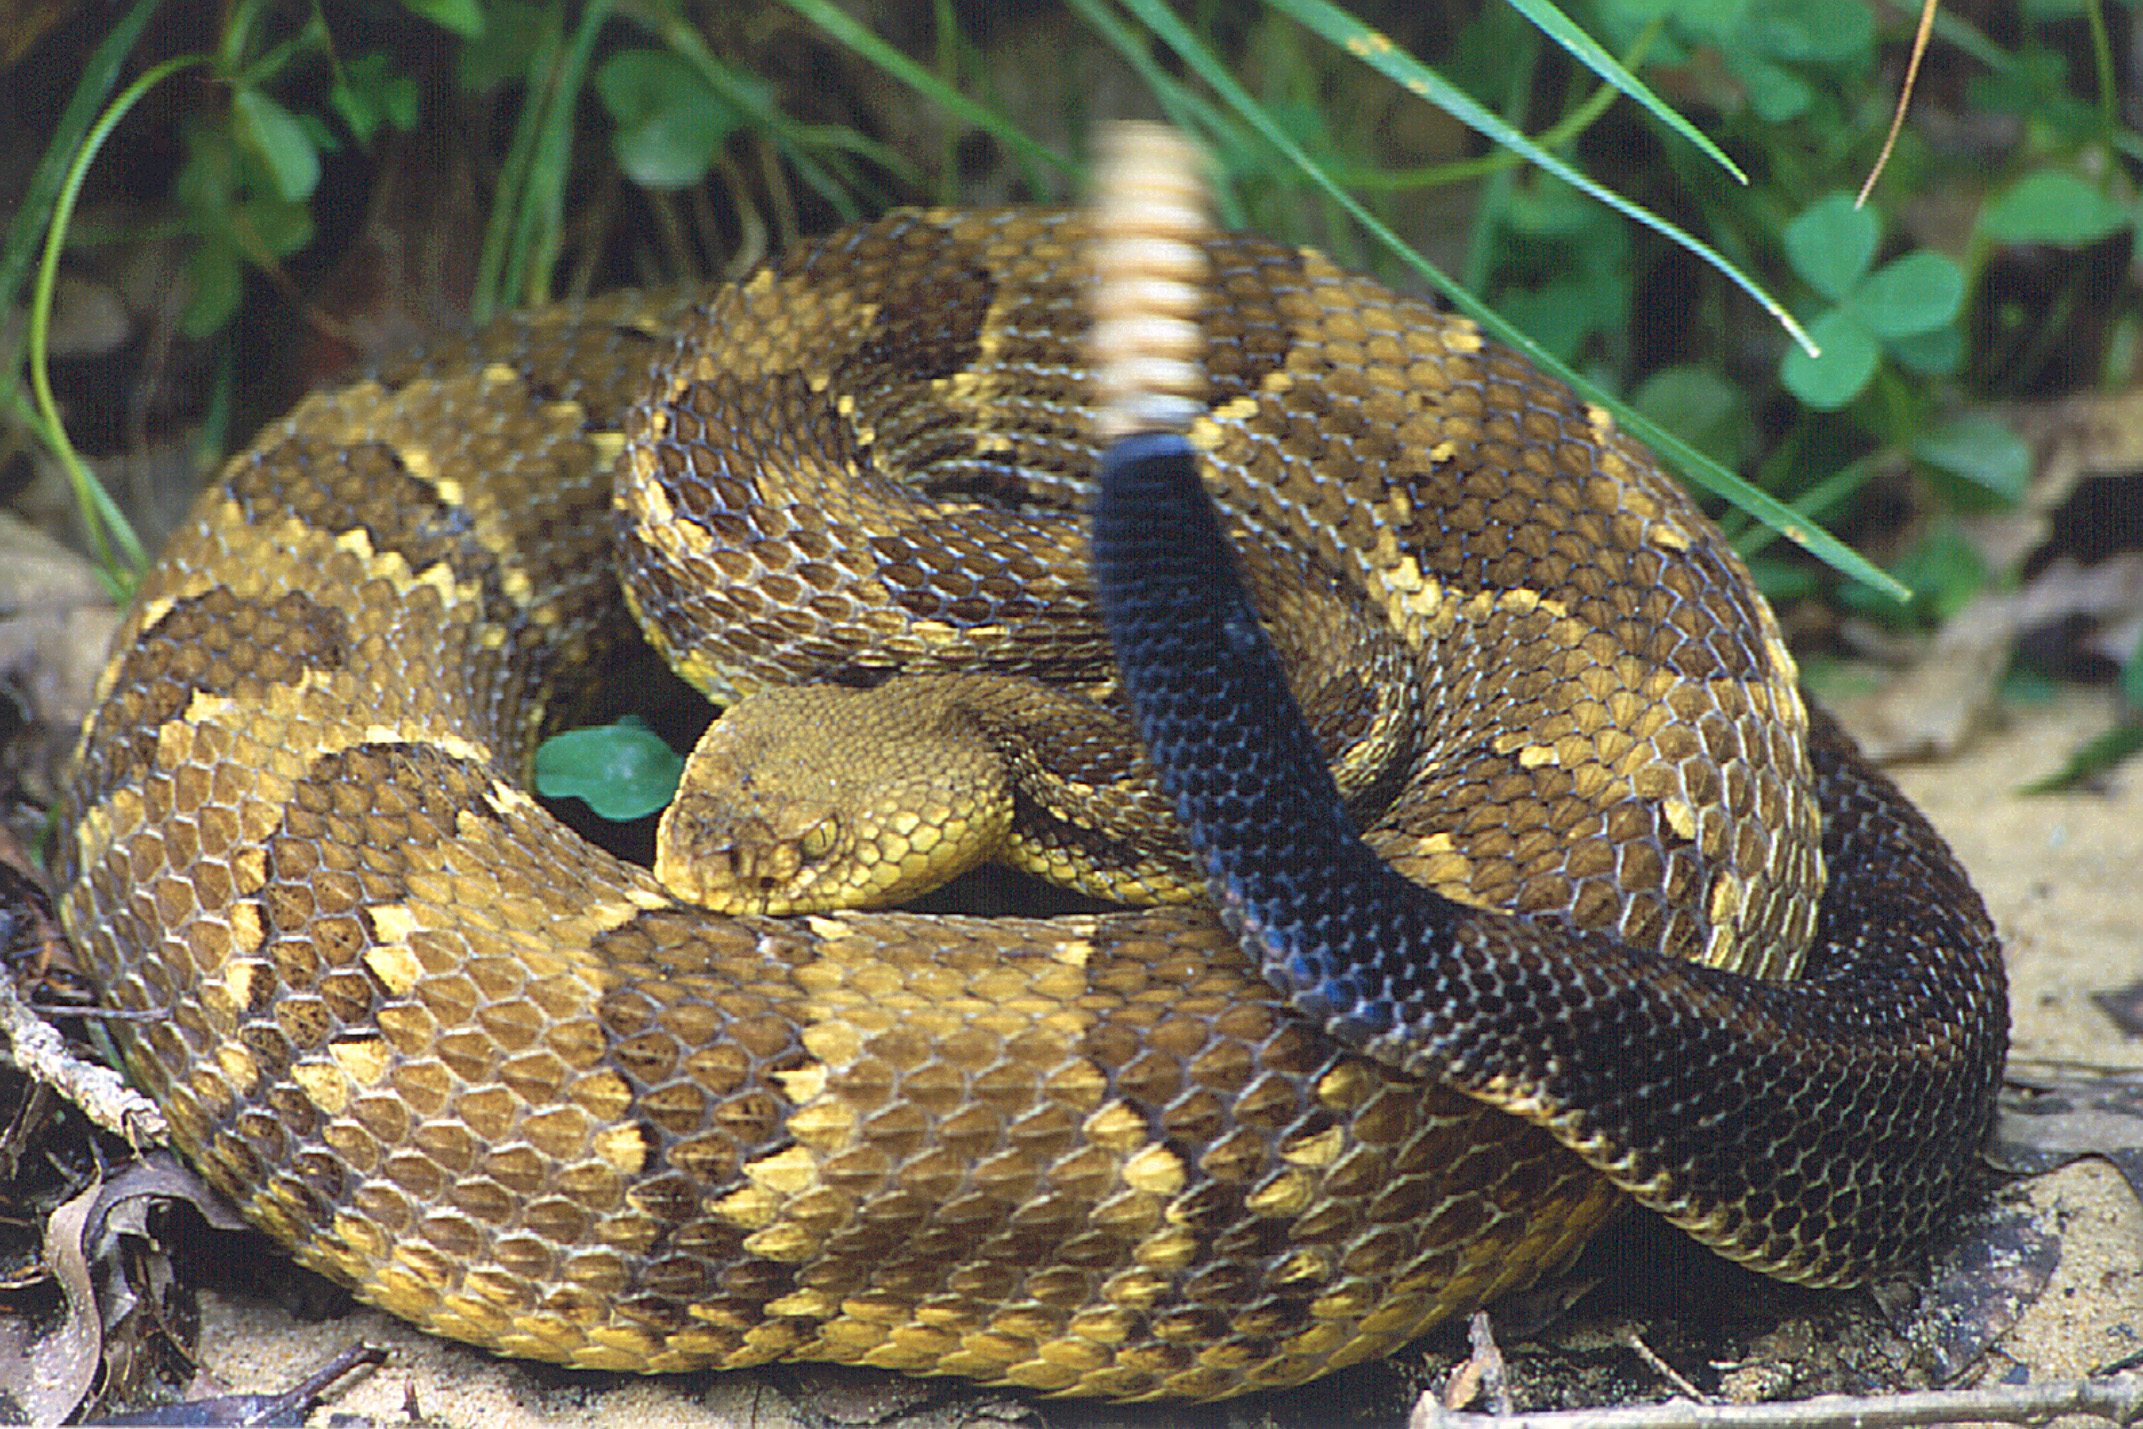 A coiled snake with brown and gold scales.